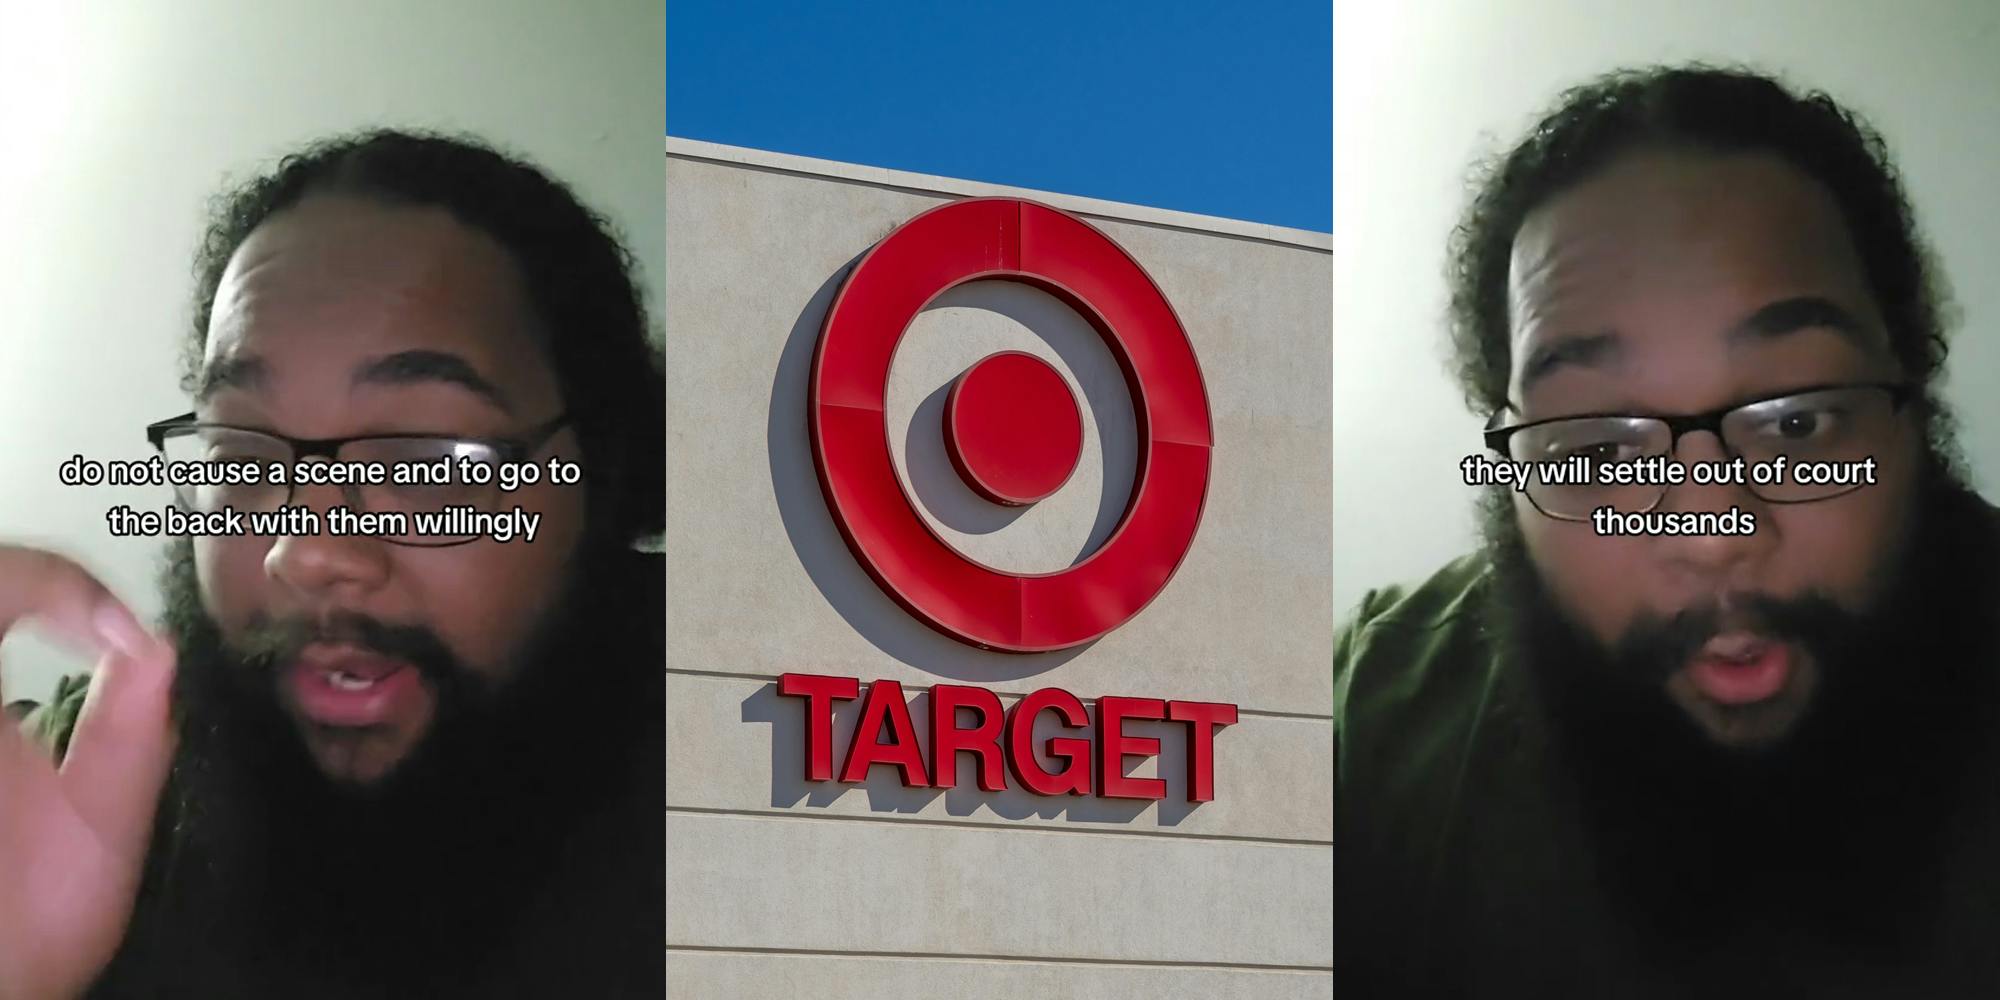 ex Target secret shopper speaking with caption "do not cause a scene and go to the back with them willingly" (l) Target sign on building (c) ex Target secret shopper speaking with caption "they will settle out of court thousands" (r)